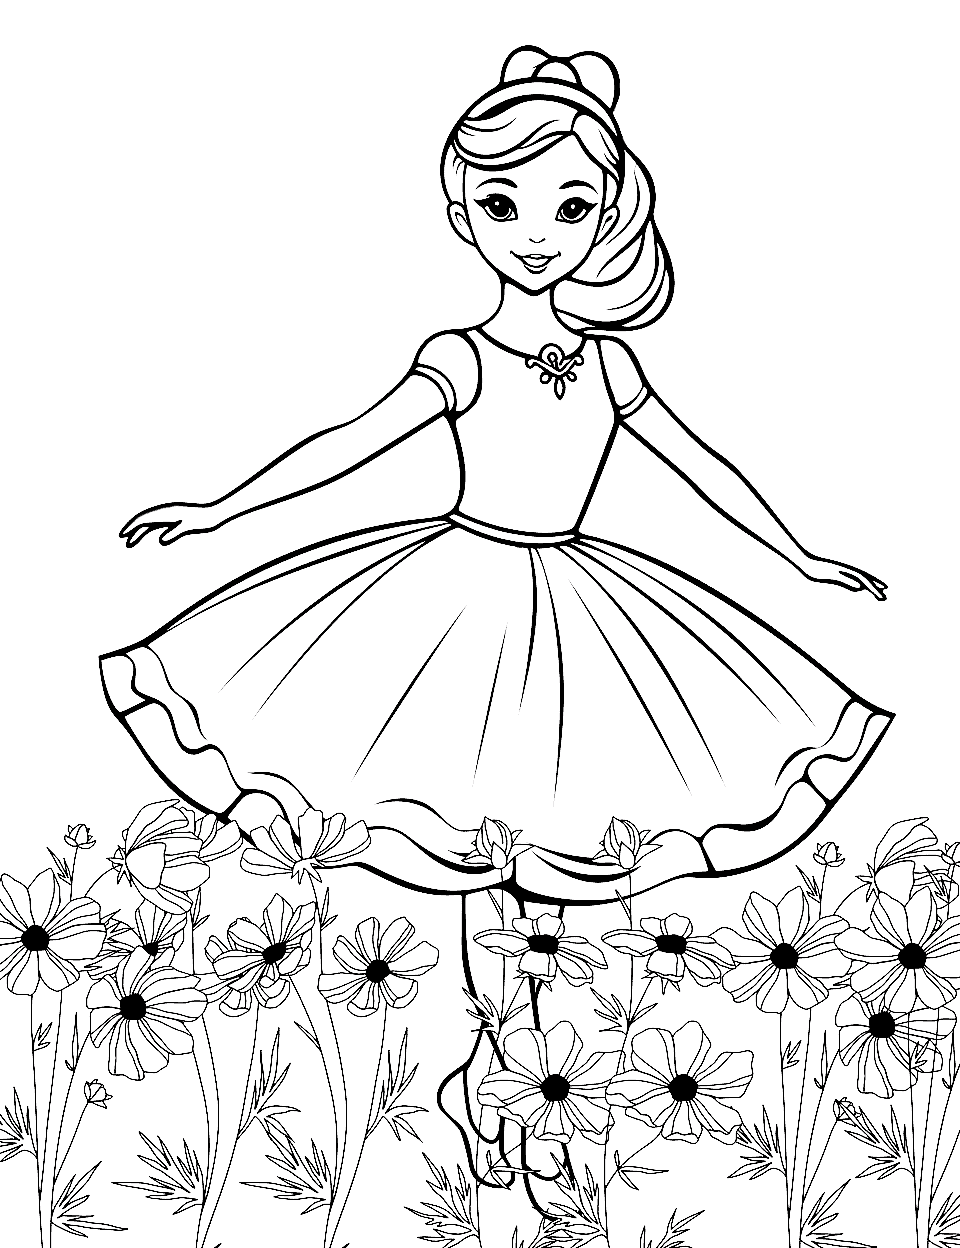 Ballerina Among Flowers Coloring Page - A ballerina in a field of colorful flowers.